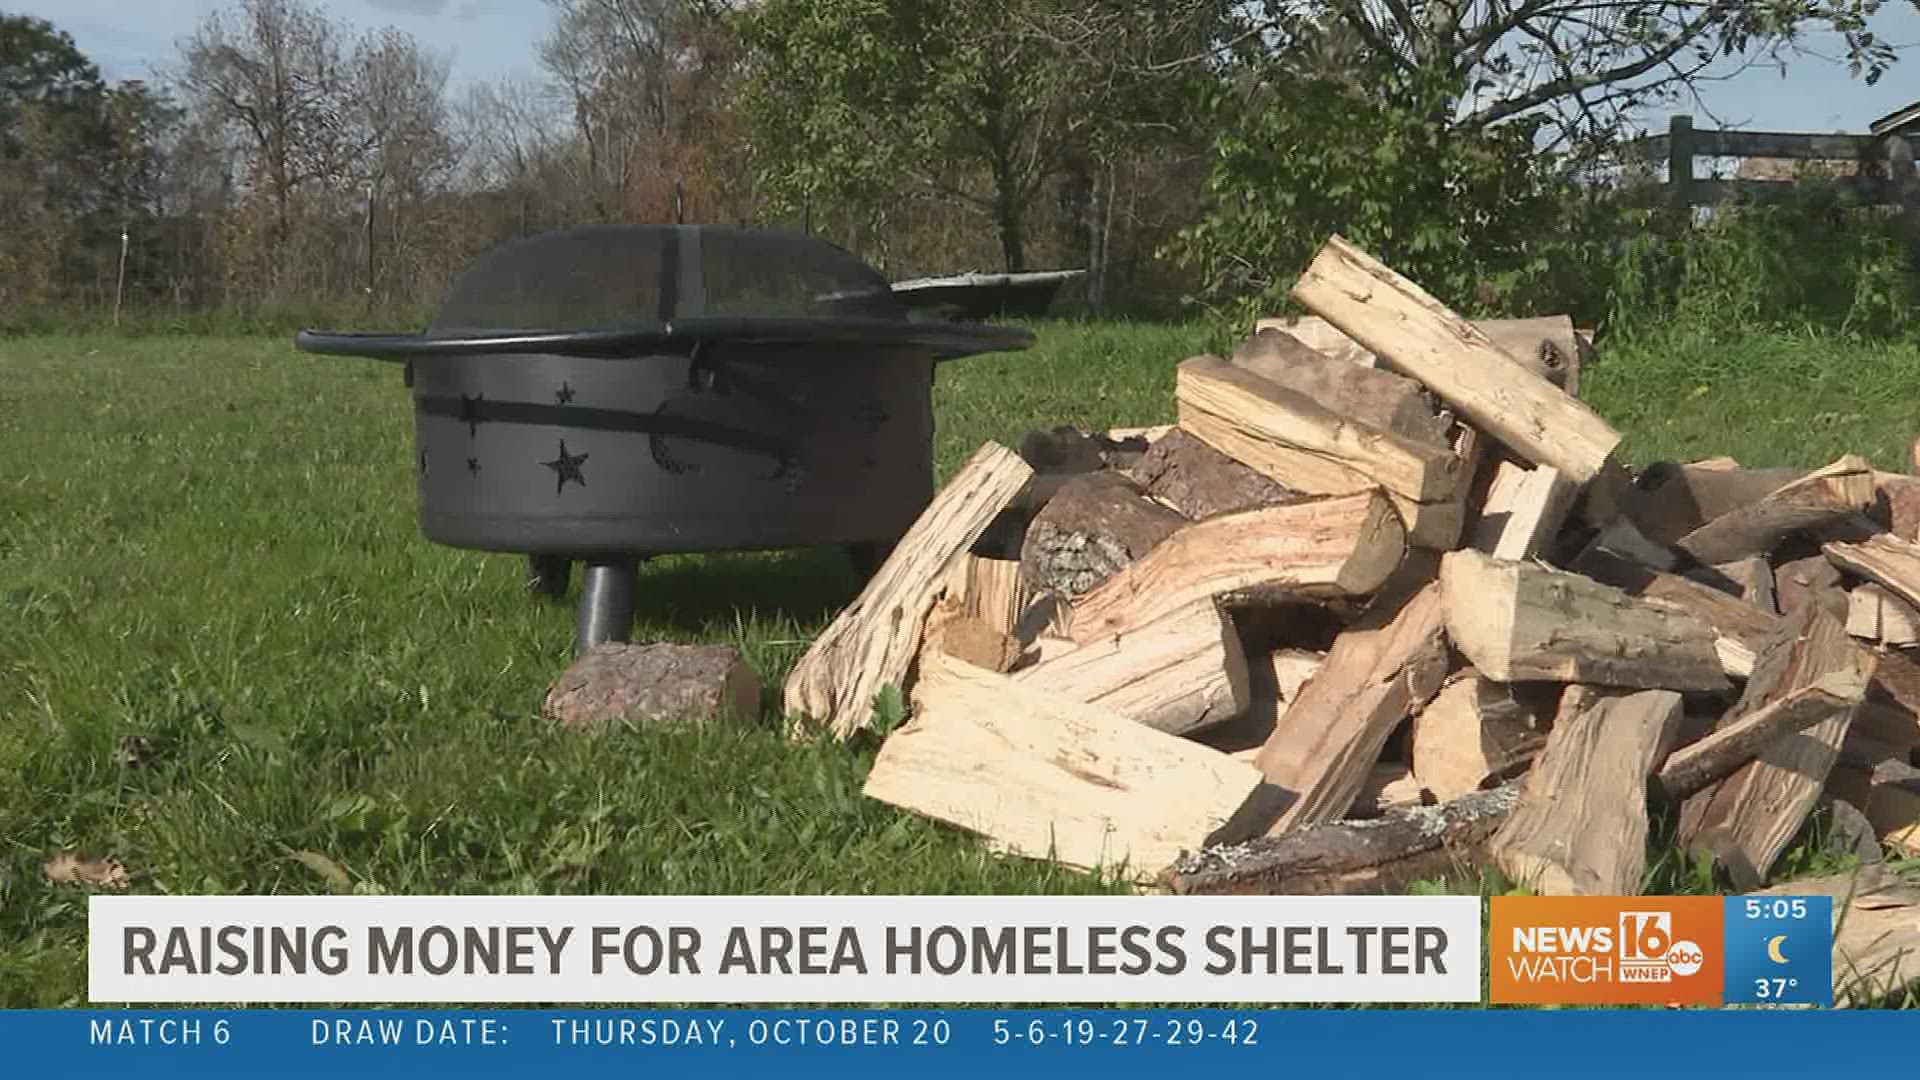 A teen from Luzerne County wants to give back to celebrate her birthday this year while raising awareness about homelessness.